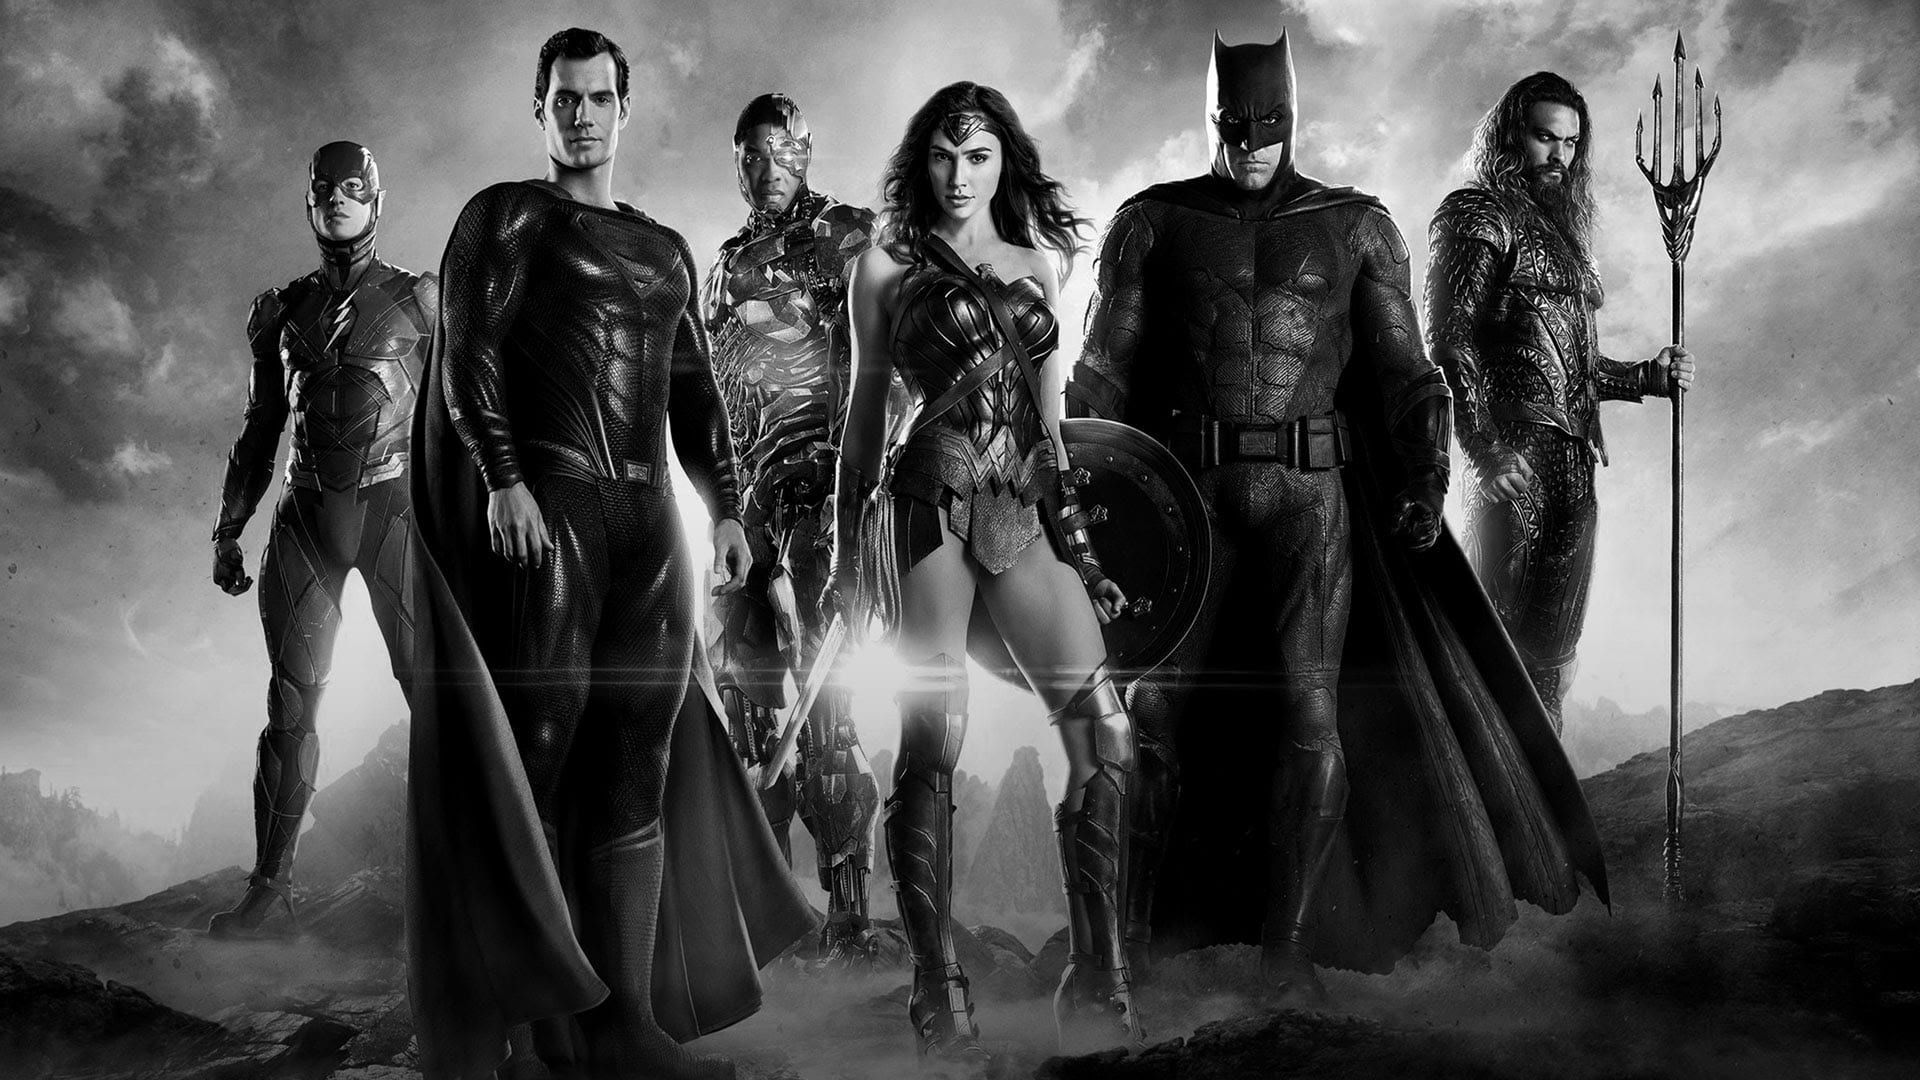 Zack Snyder’s Justice League